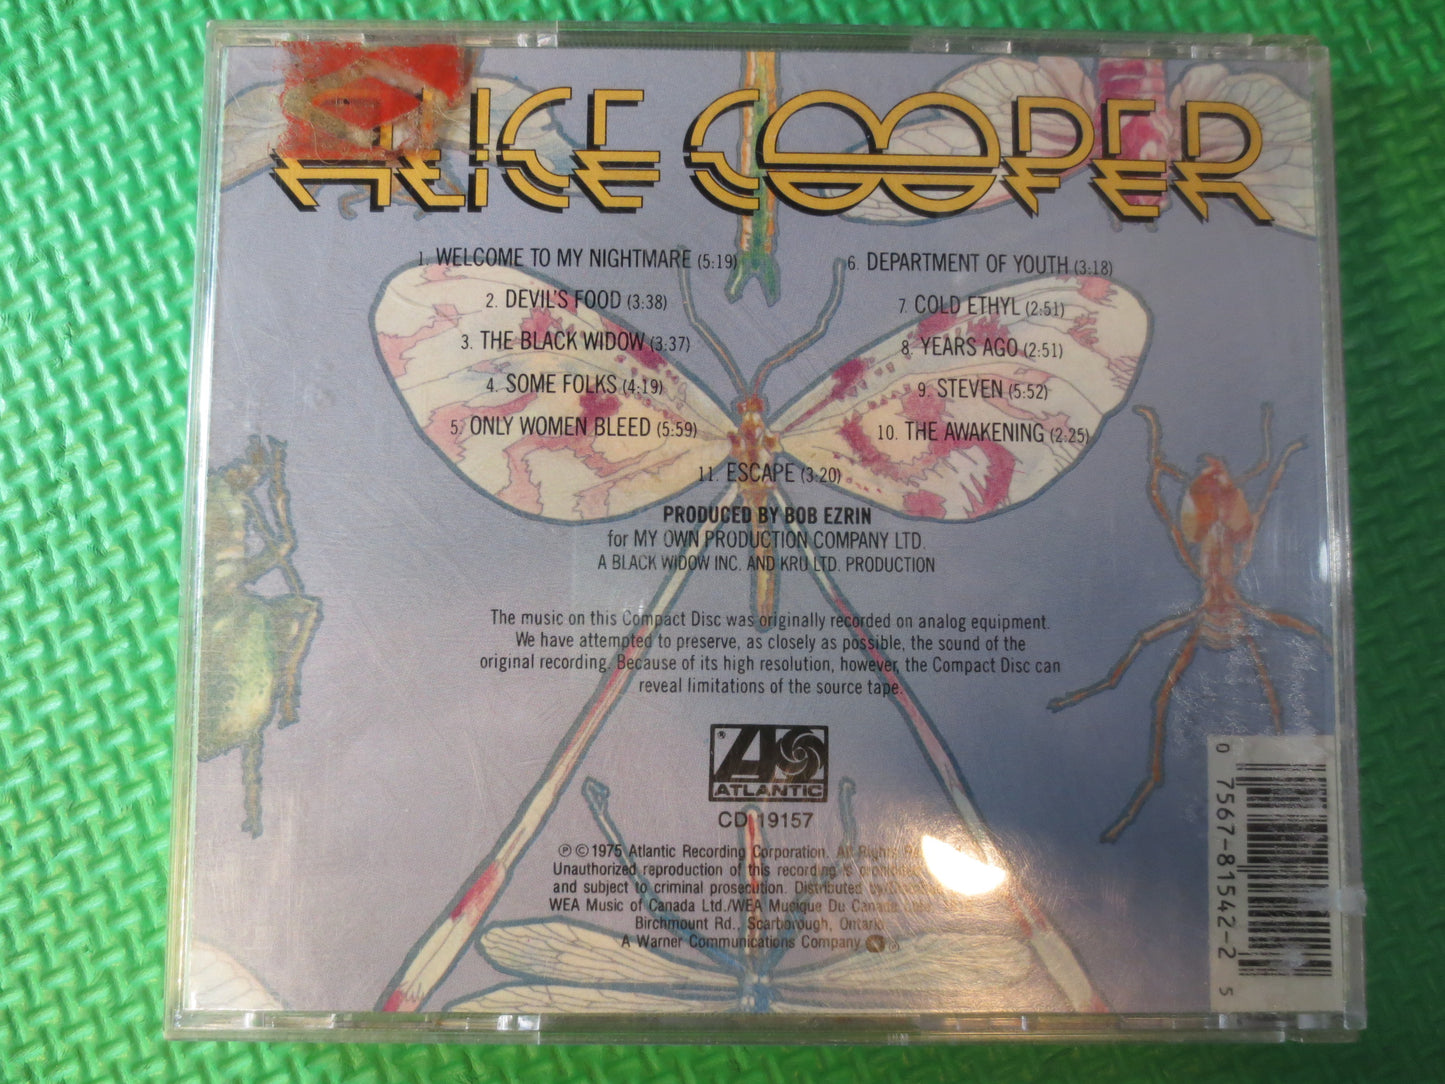 ALICE COOPER, WELCOME to my Nightmare, Rock Cd, Alice Cooper Lp, Rock Lp, Pop Cd, Pop Lp, Pop Music Cd, Music Cd, Compact Disc